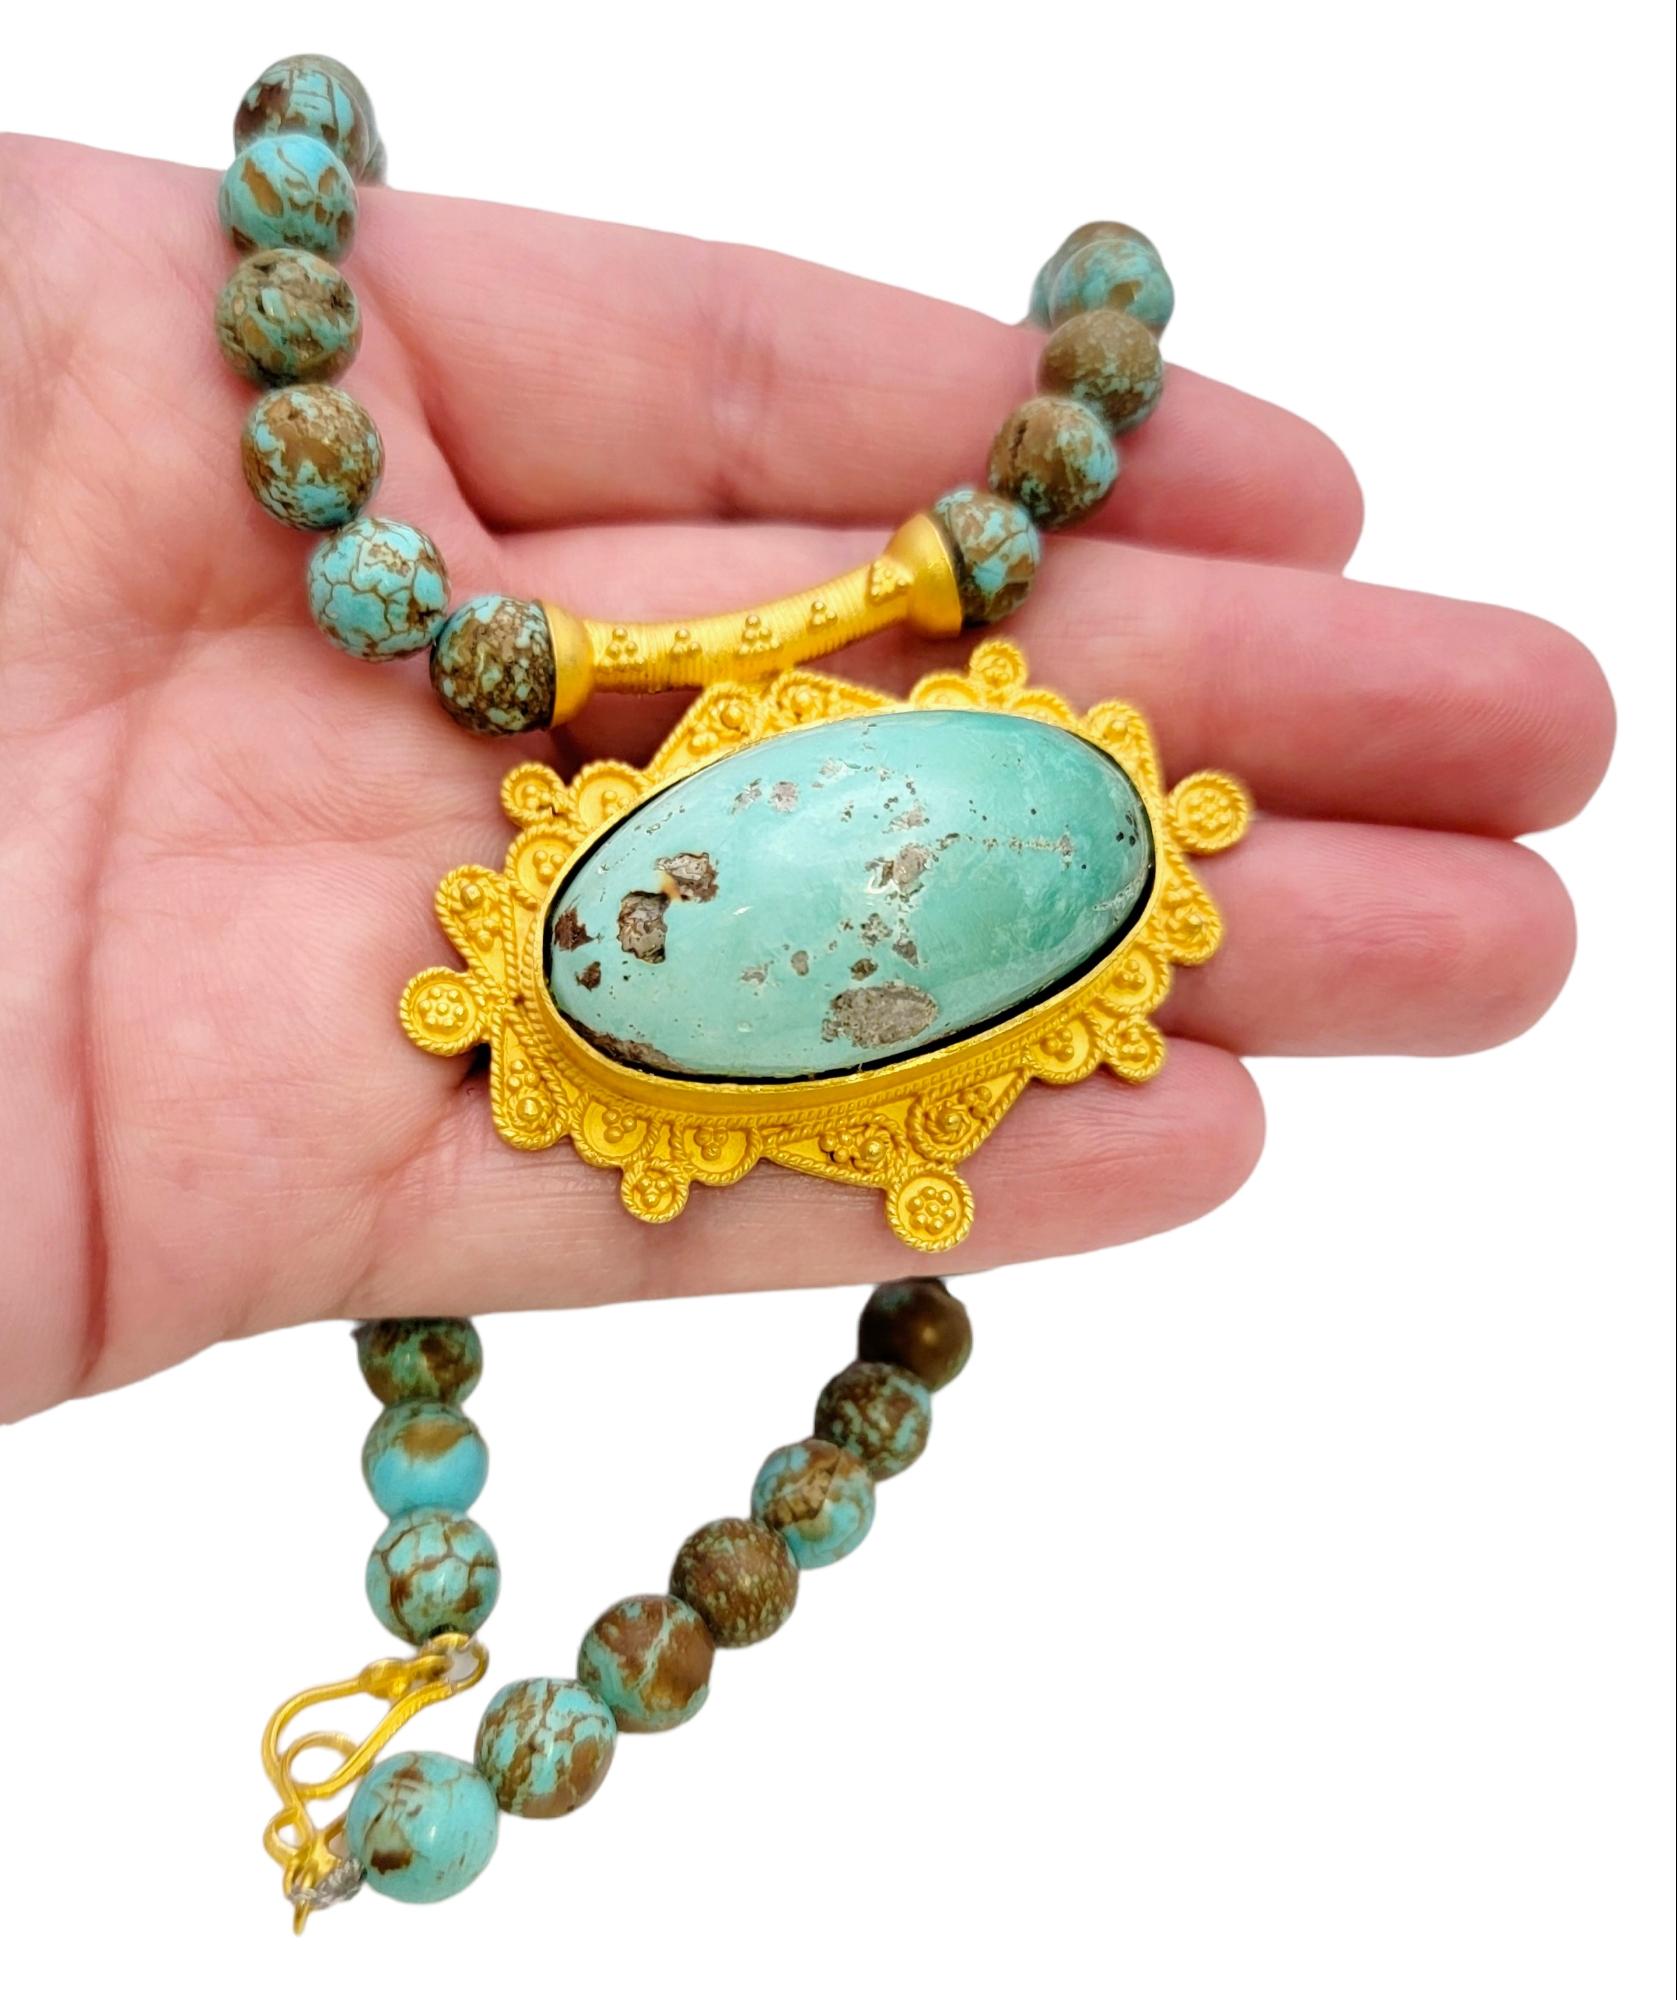 Natural Turquoise Beaded Necklace with Ornate 18 Karat Yellow Gold Pendant For Sale 6